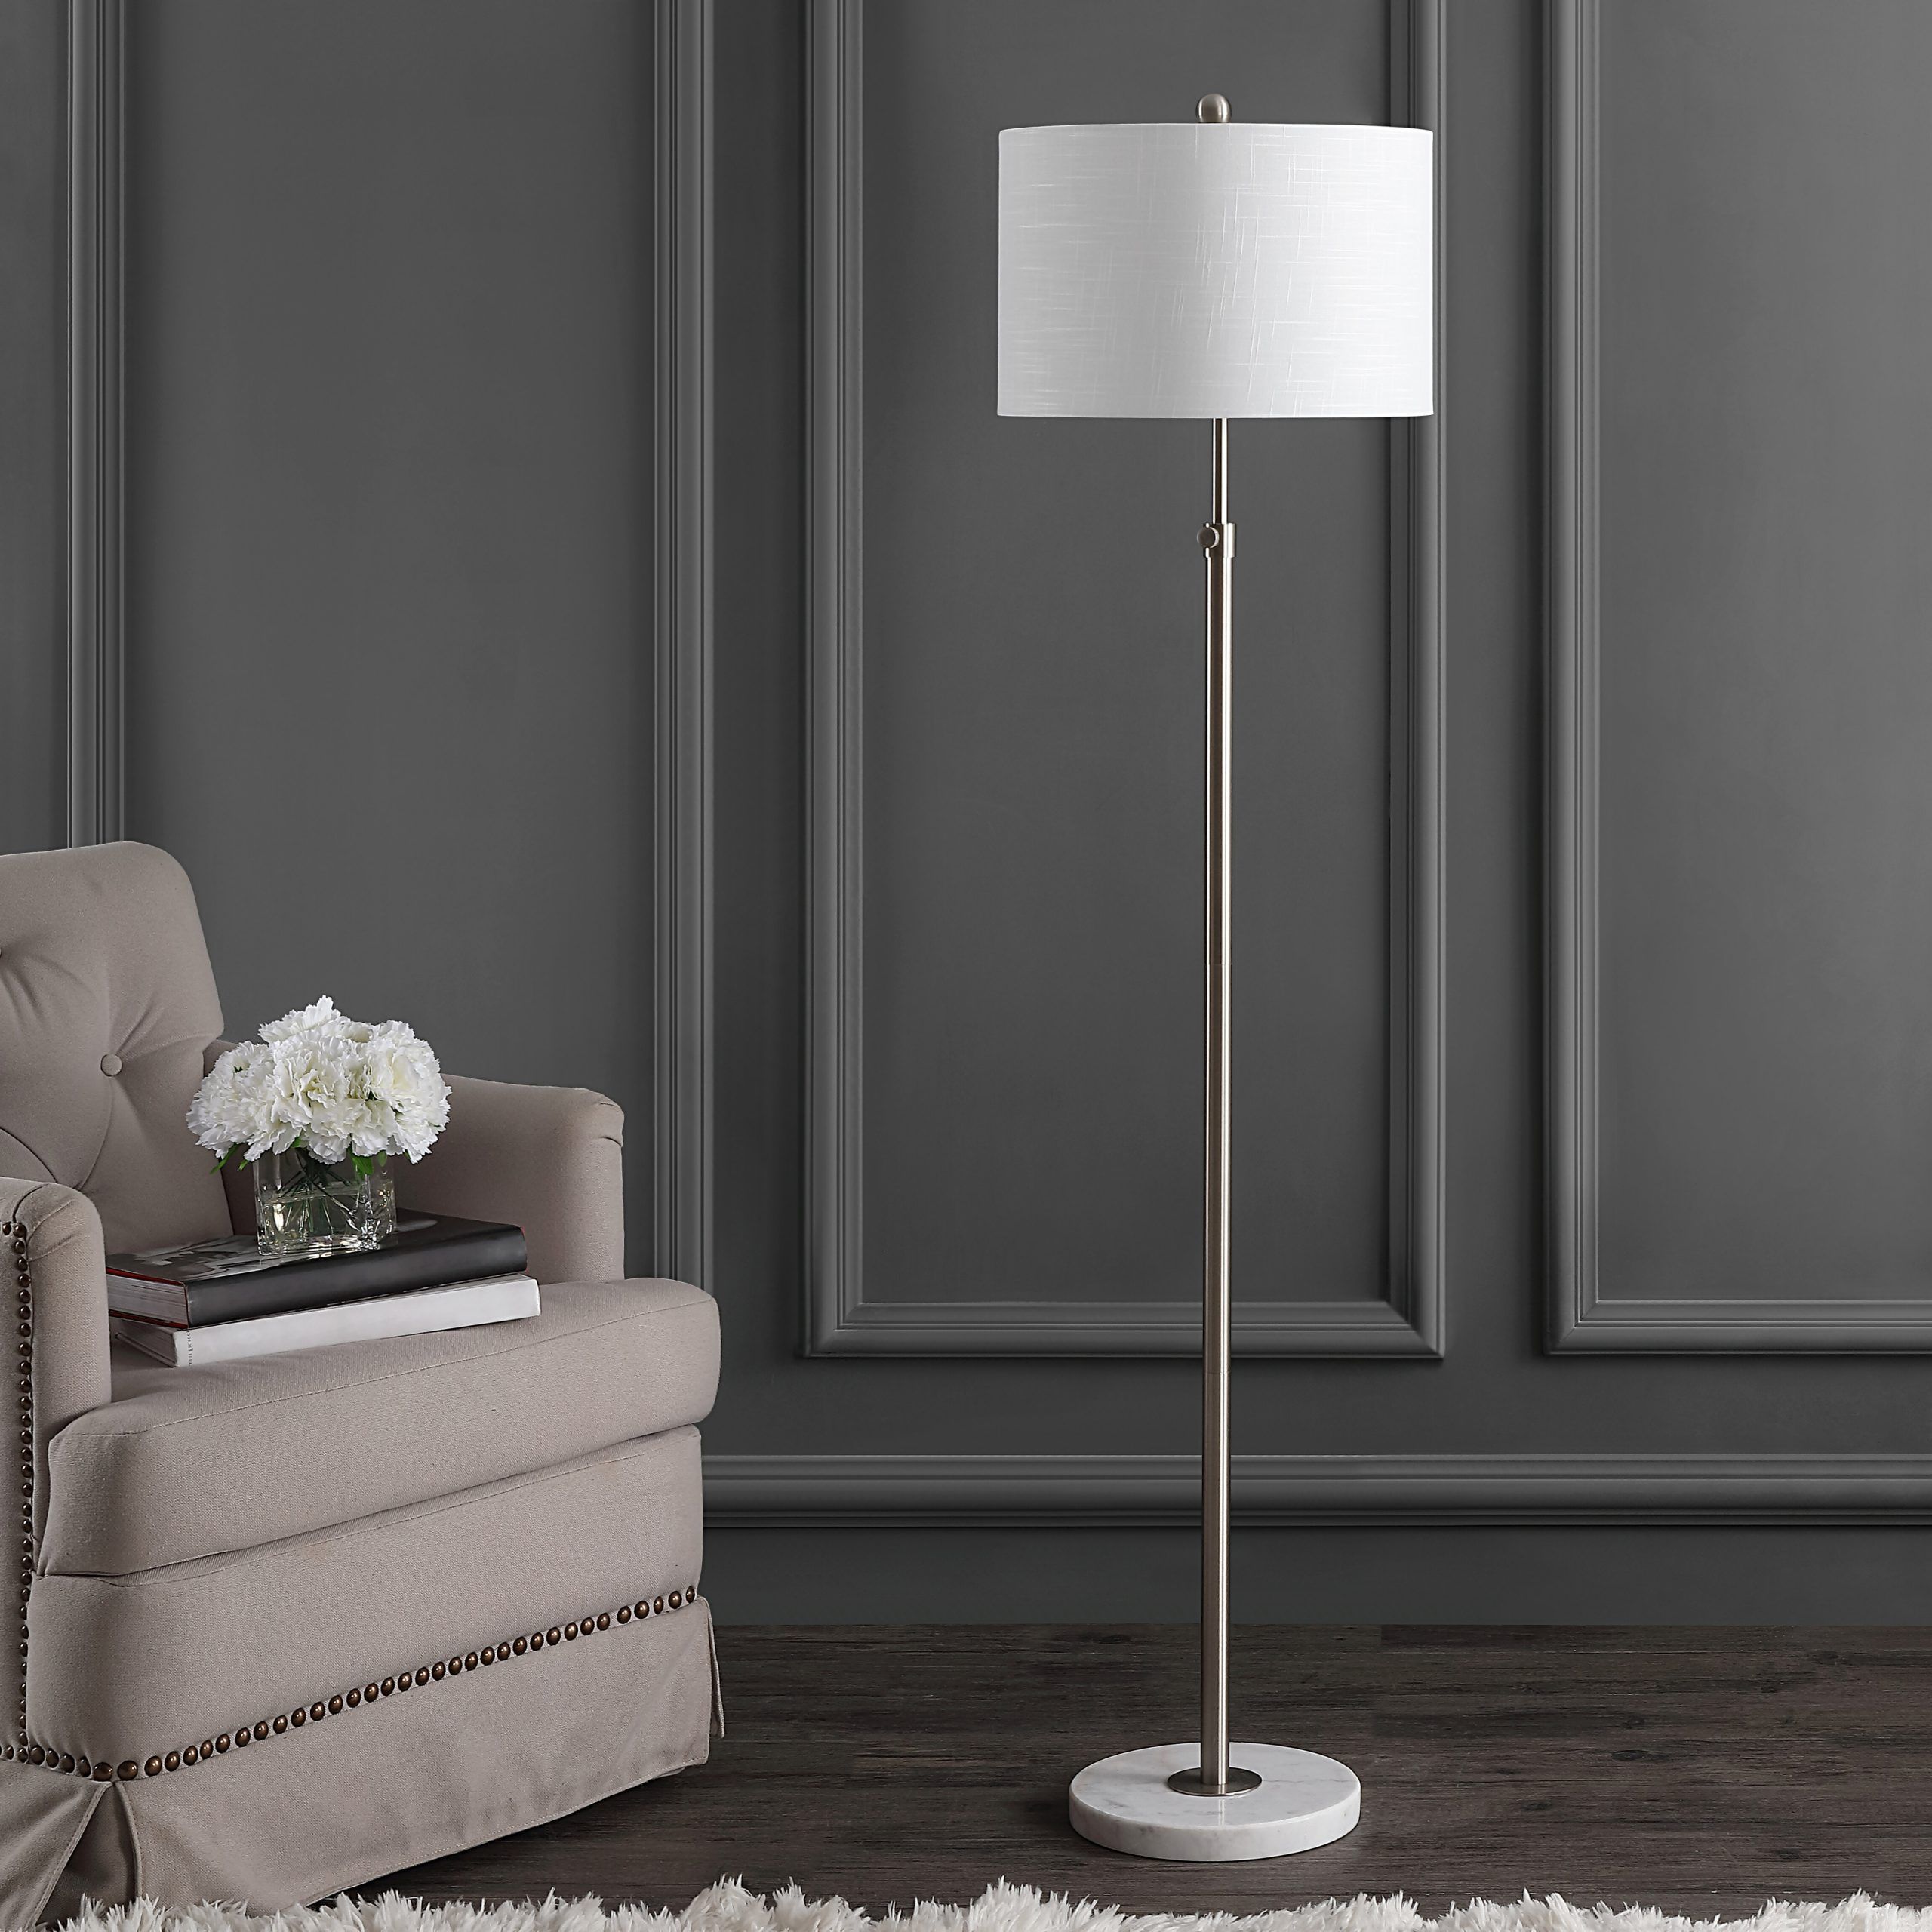 Wayfair | Chrome Floor Lamps You'll Love In 2023 Pertaining To Chrome Finish Metal Floor Lamps (View 7 of 20)